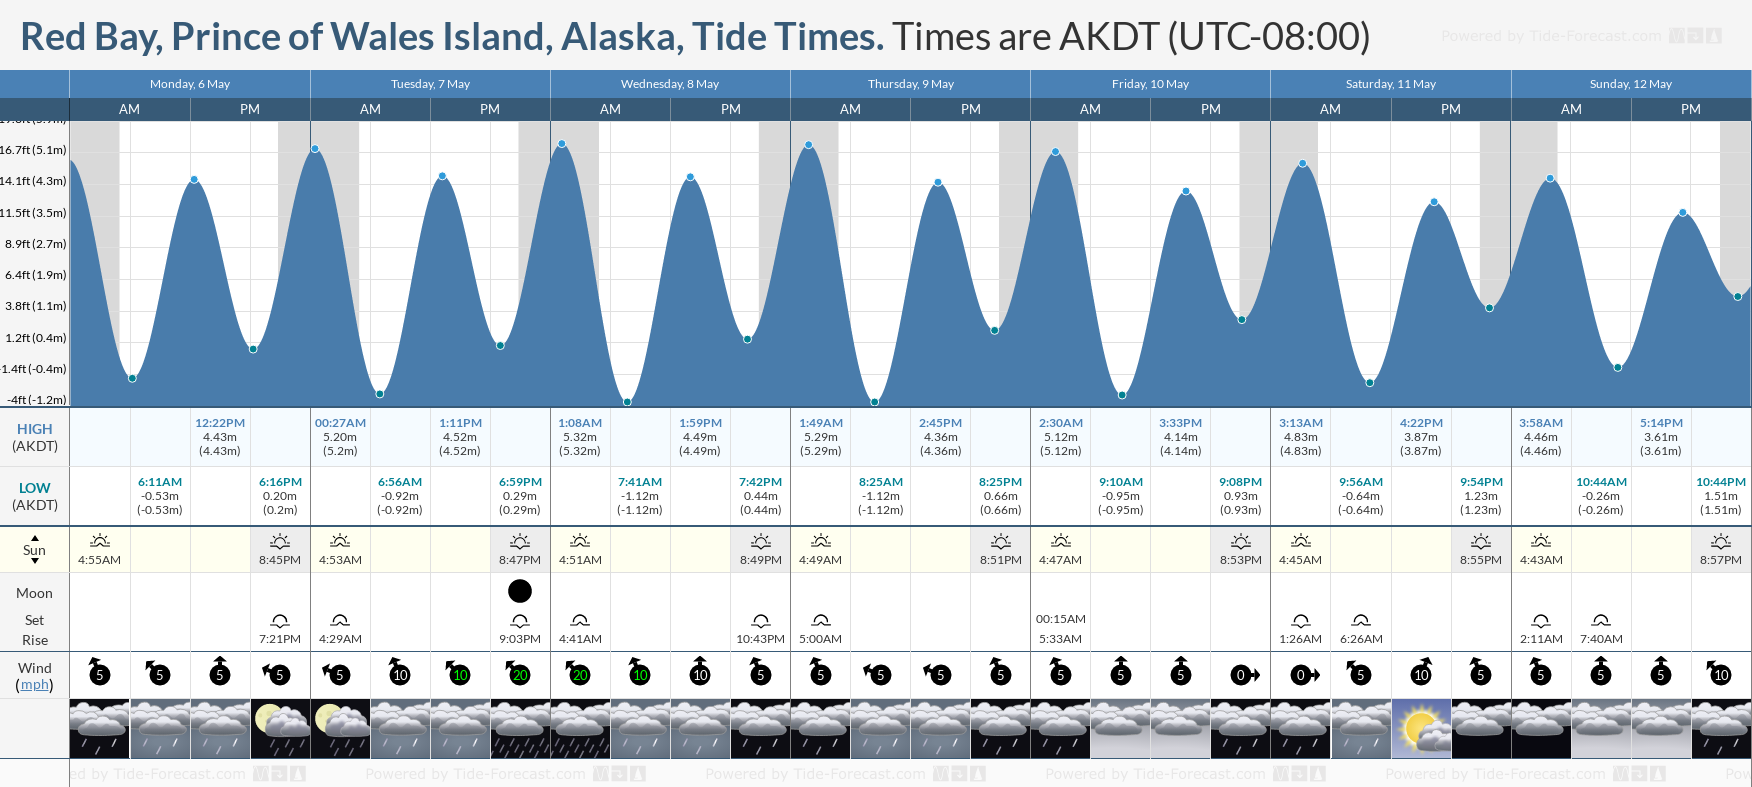 Red Bay, Prince of Wales Island, Alaska Tide Chart including high and low tide tide times for the next 7 days